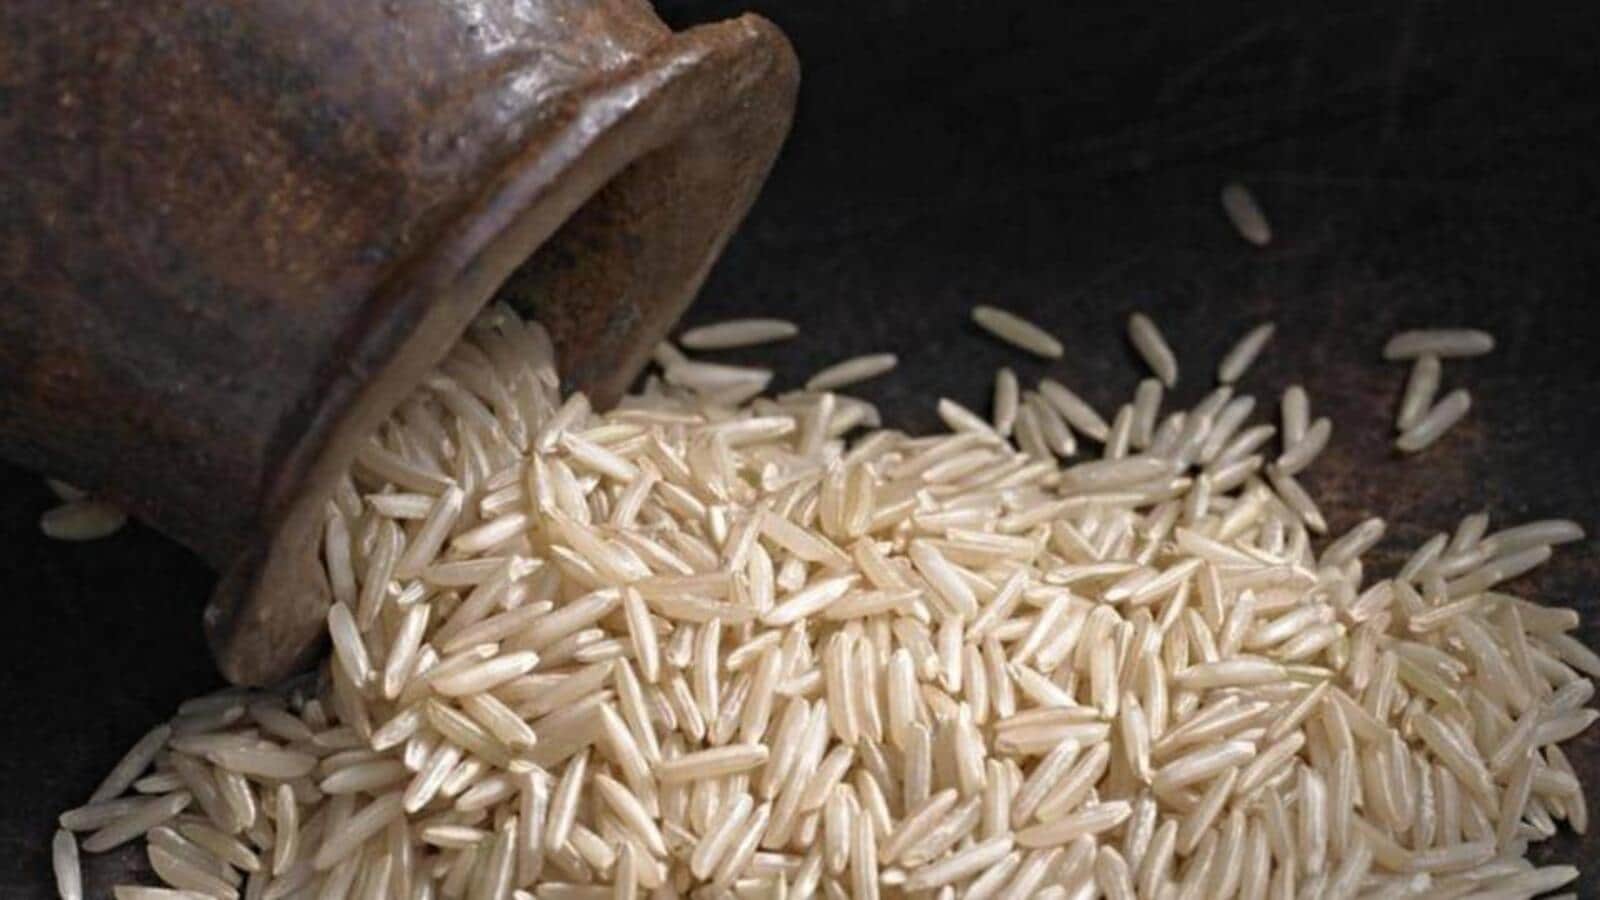 Fortified rice leading to side effects among Adivasis: Experts